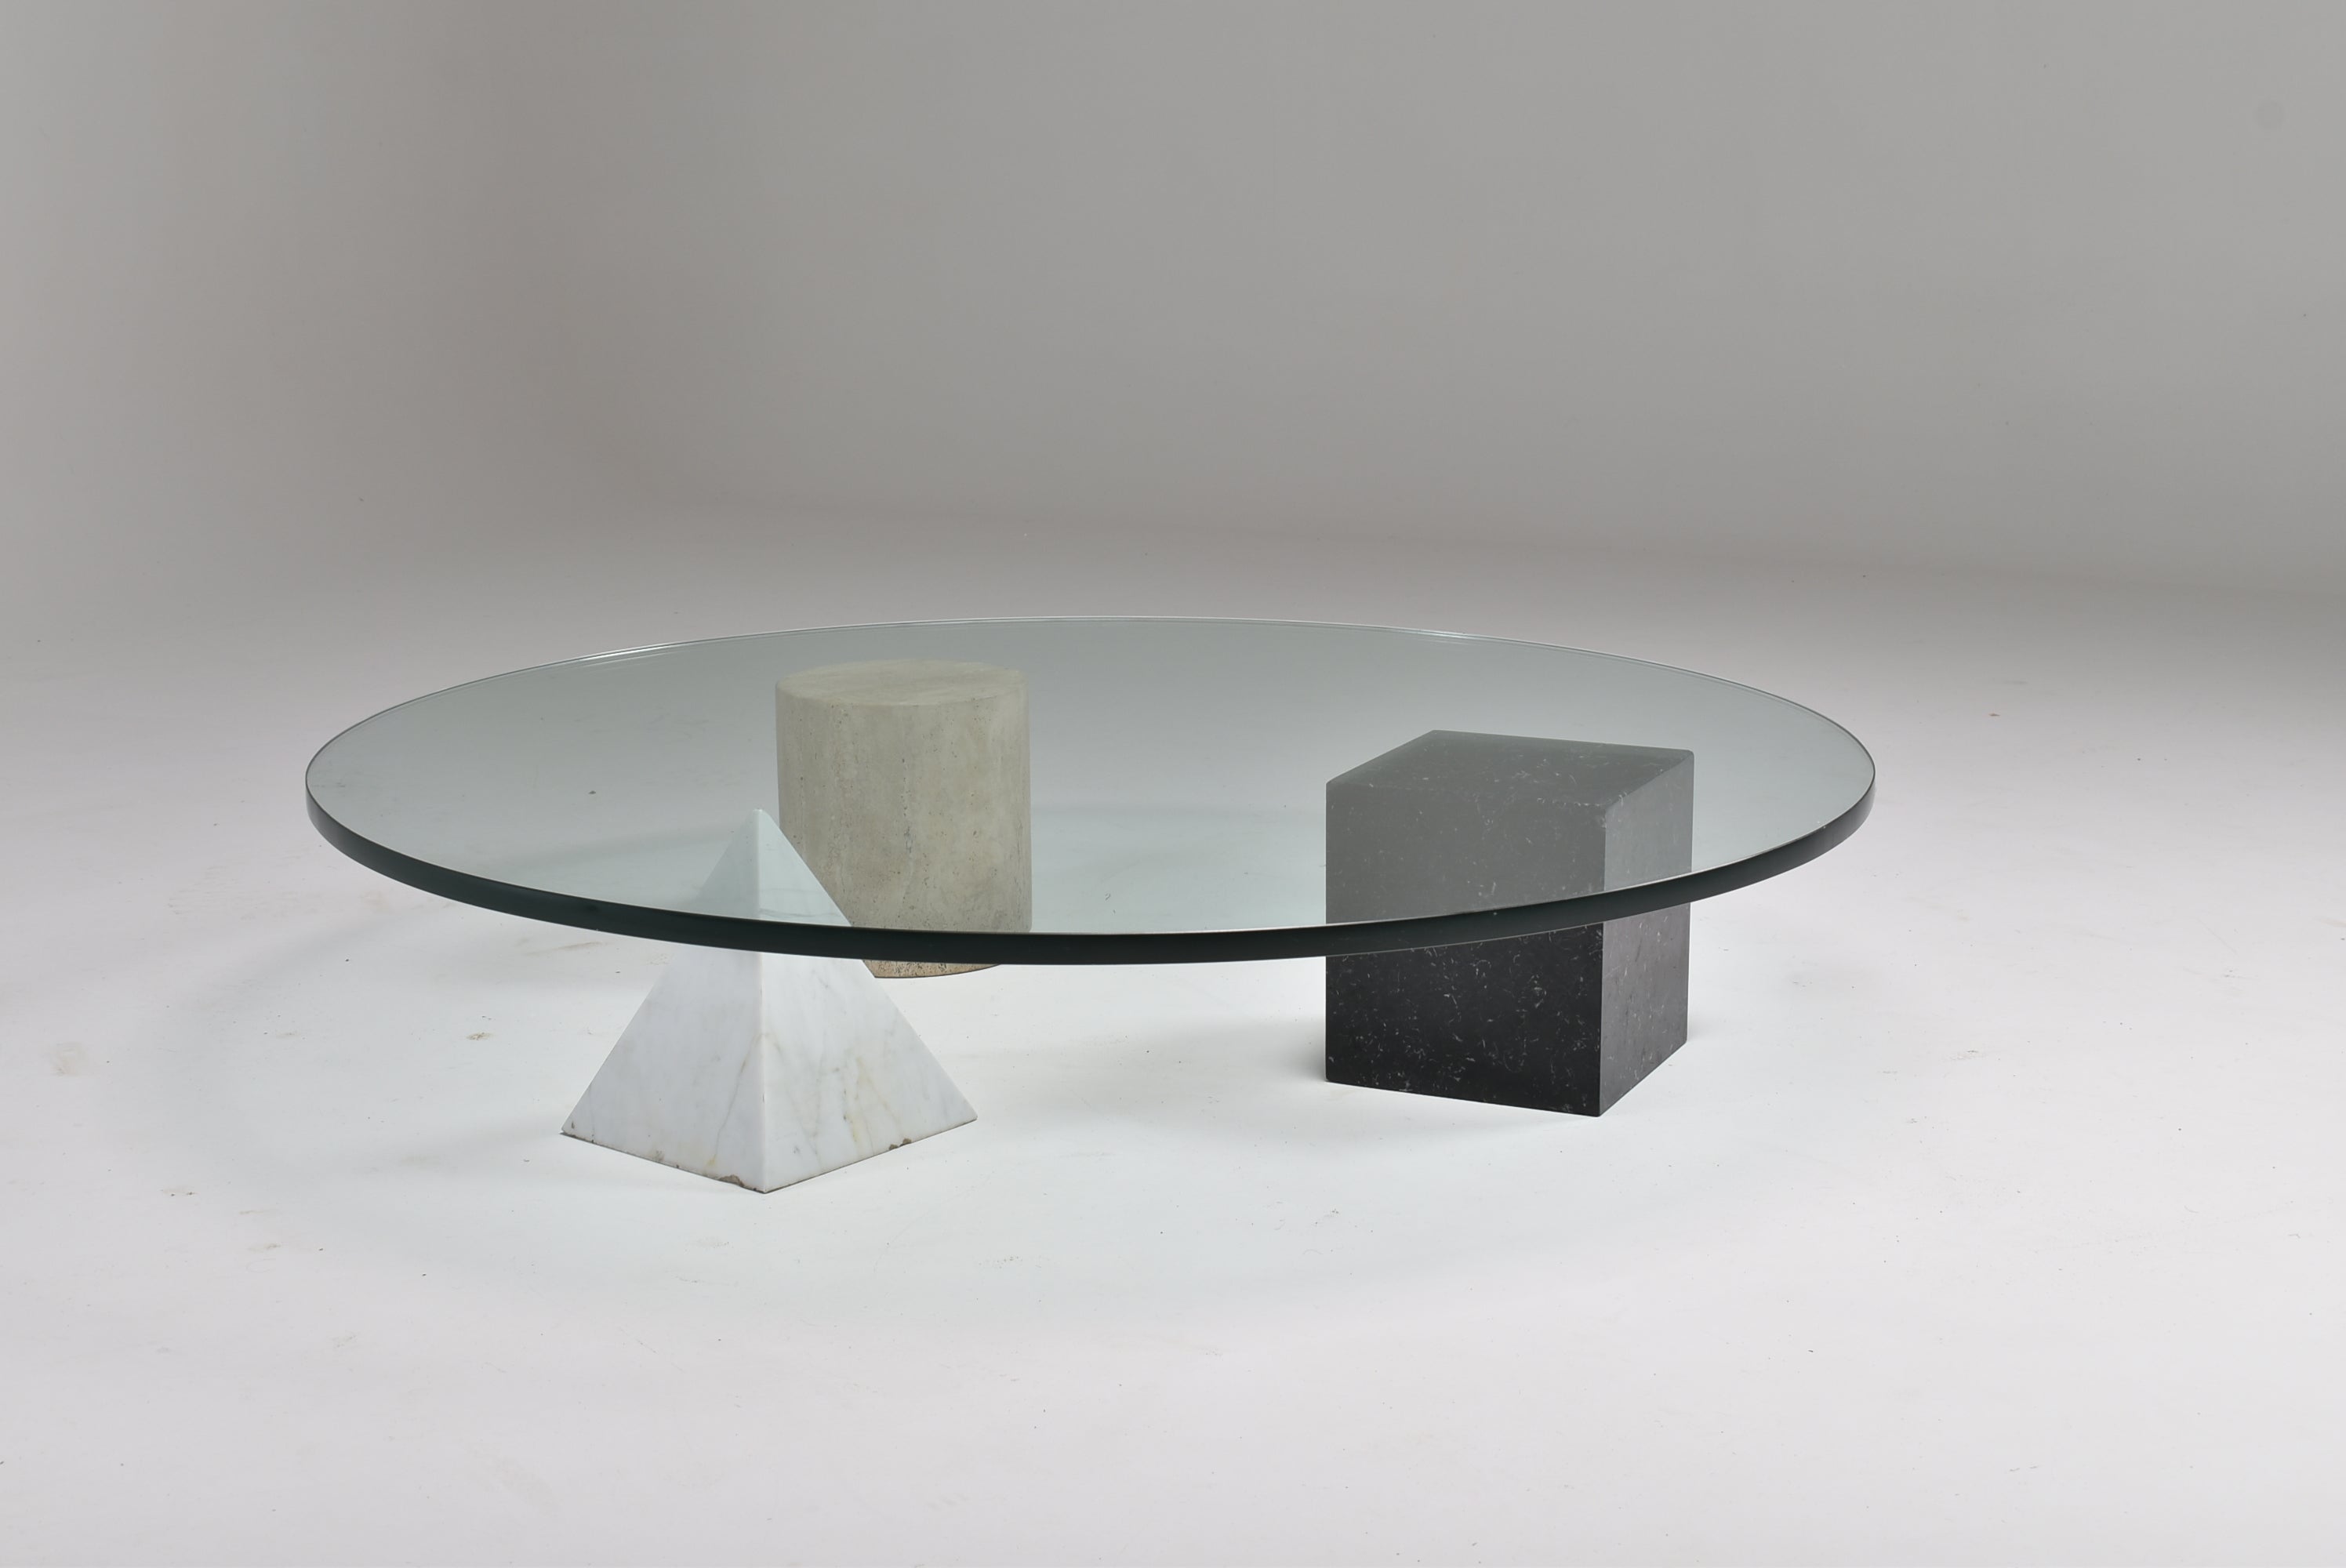 Forms of the Euclidean geometry, the cube, the cylinder, and the pyramid, made of three different marbles and colours, represent the basis of the table finished with a big sheet of transparent glass. The three elements are independent and can be